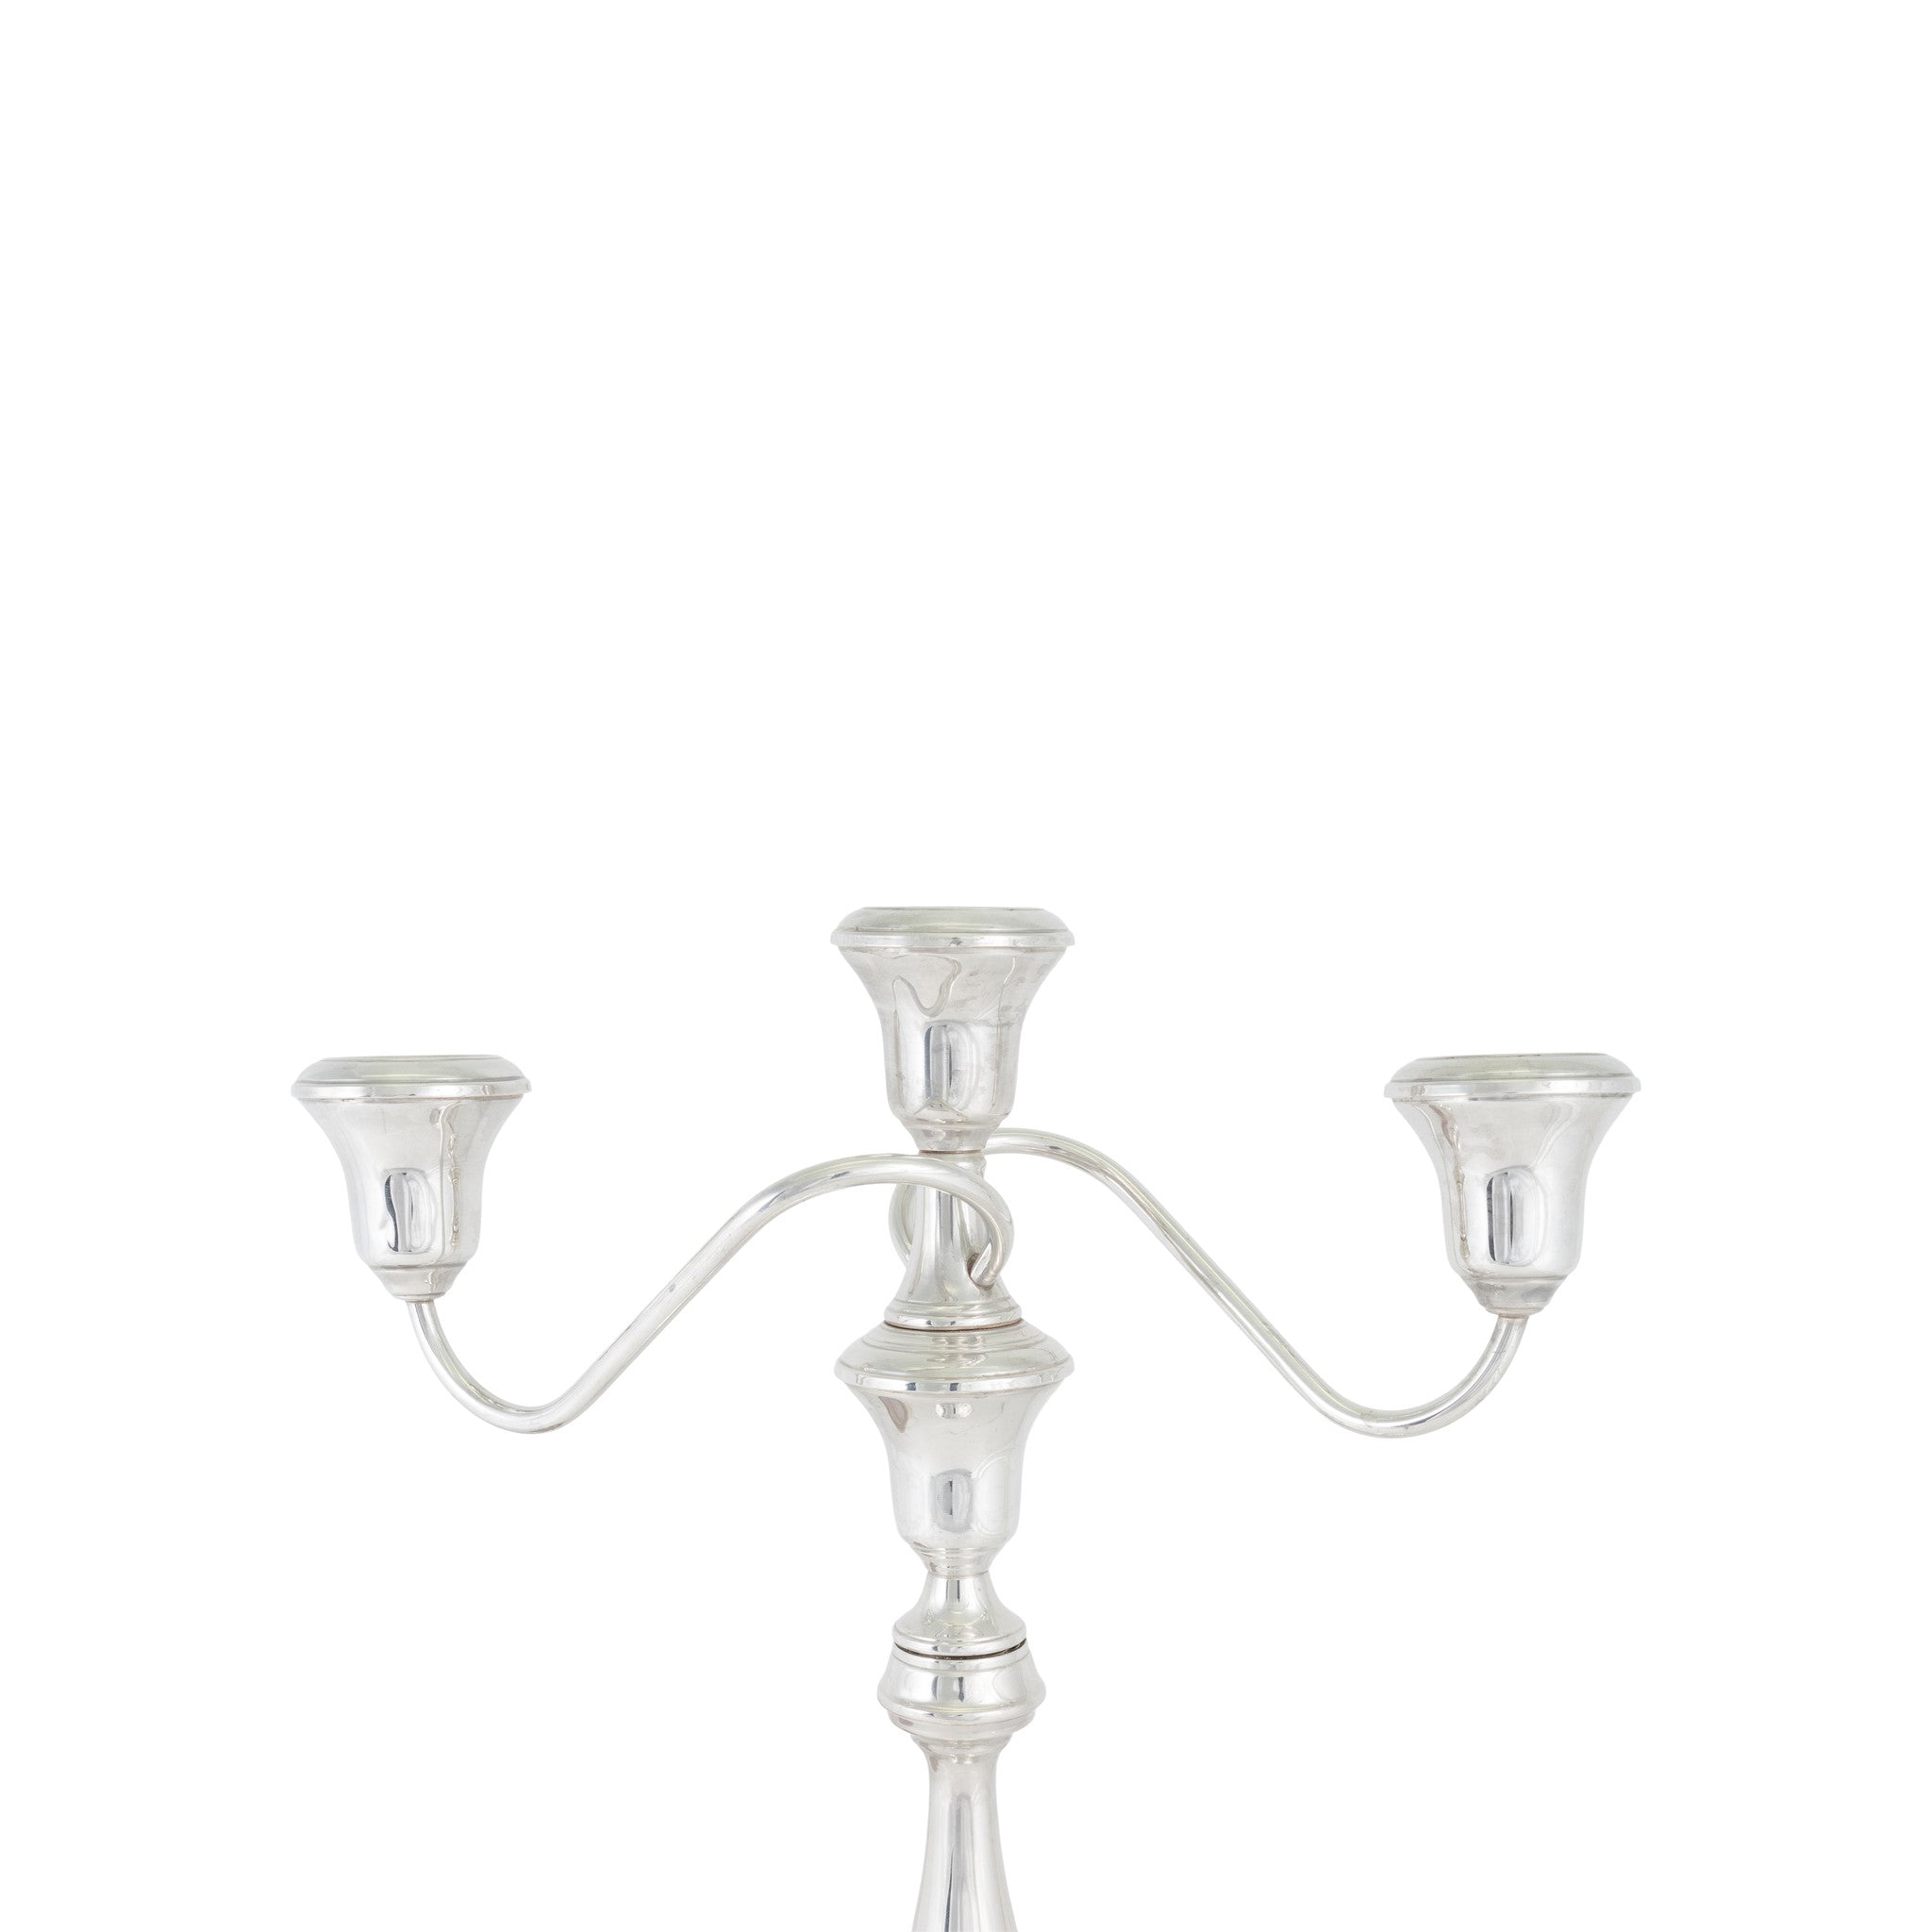 Towle Sterling Candelabras